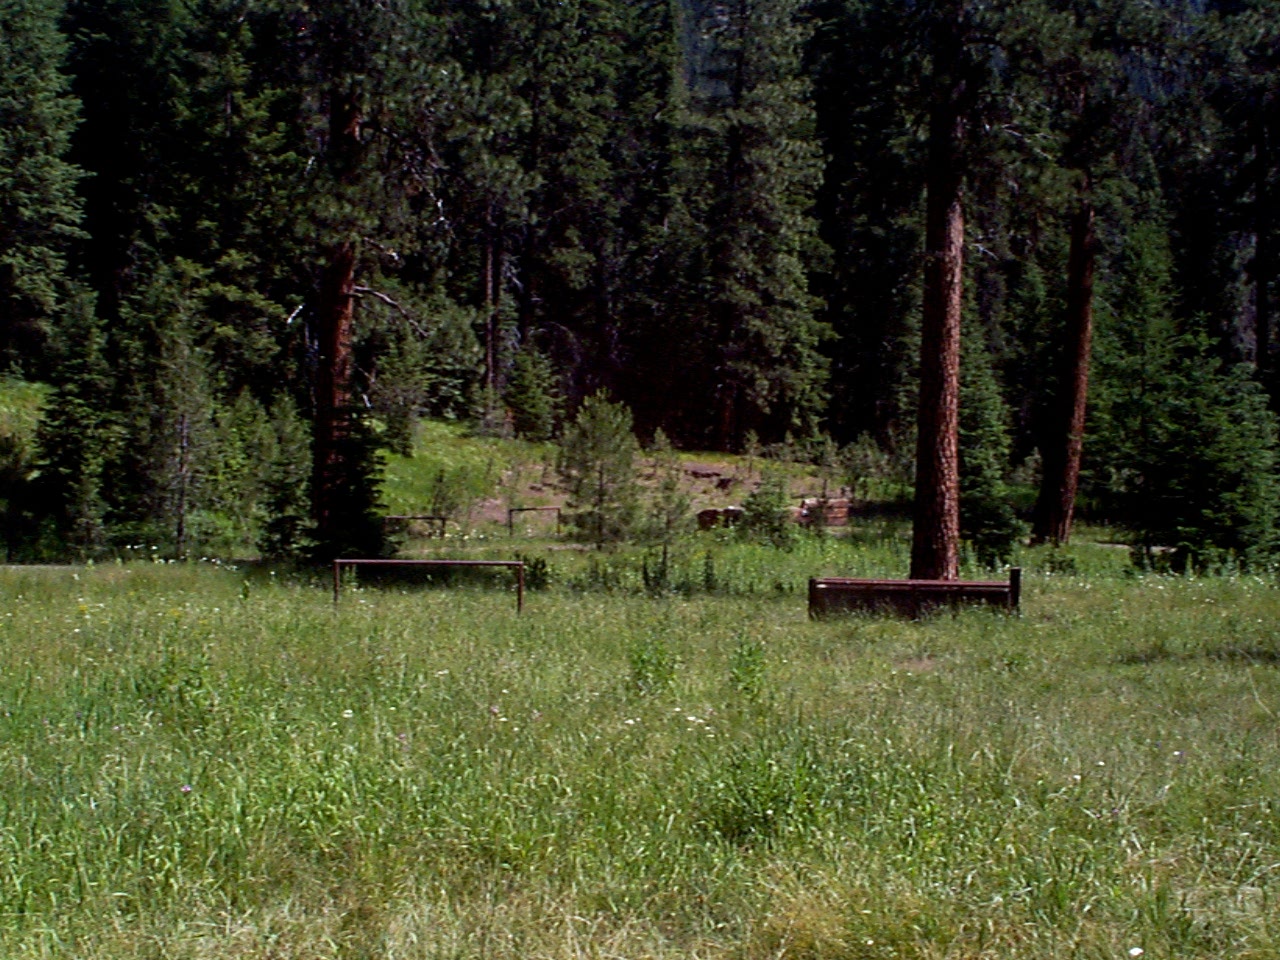 Grassy trailhead area with horse hitching rails